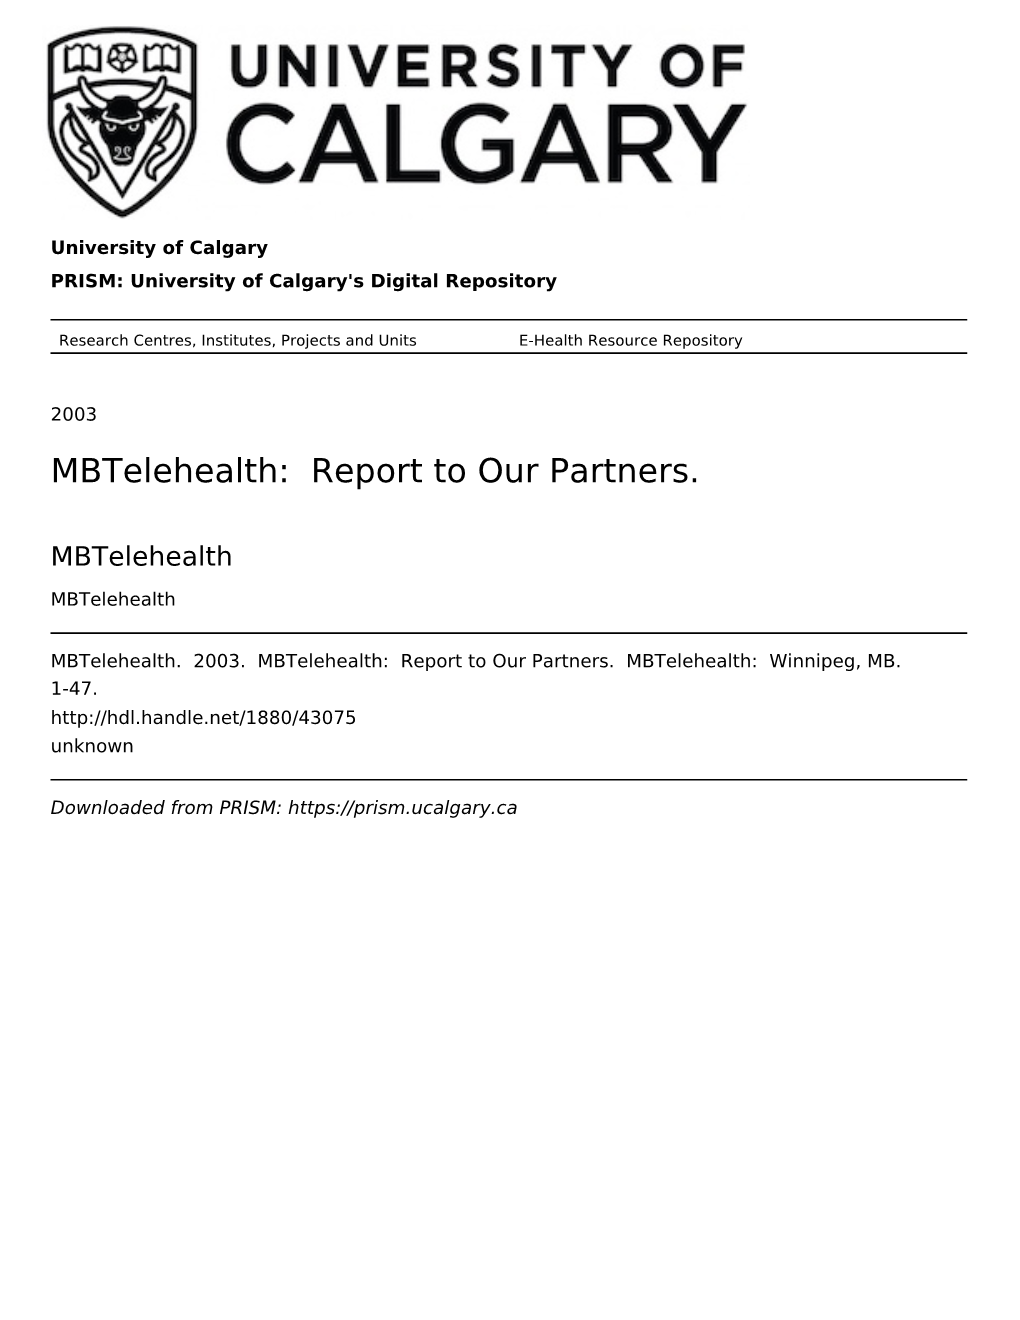 Mbtelehealth: Report to Our Partners